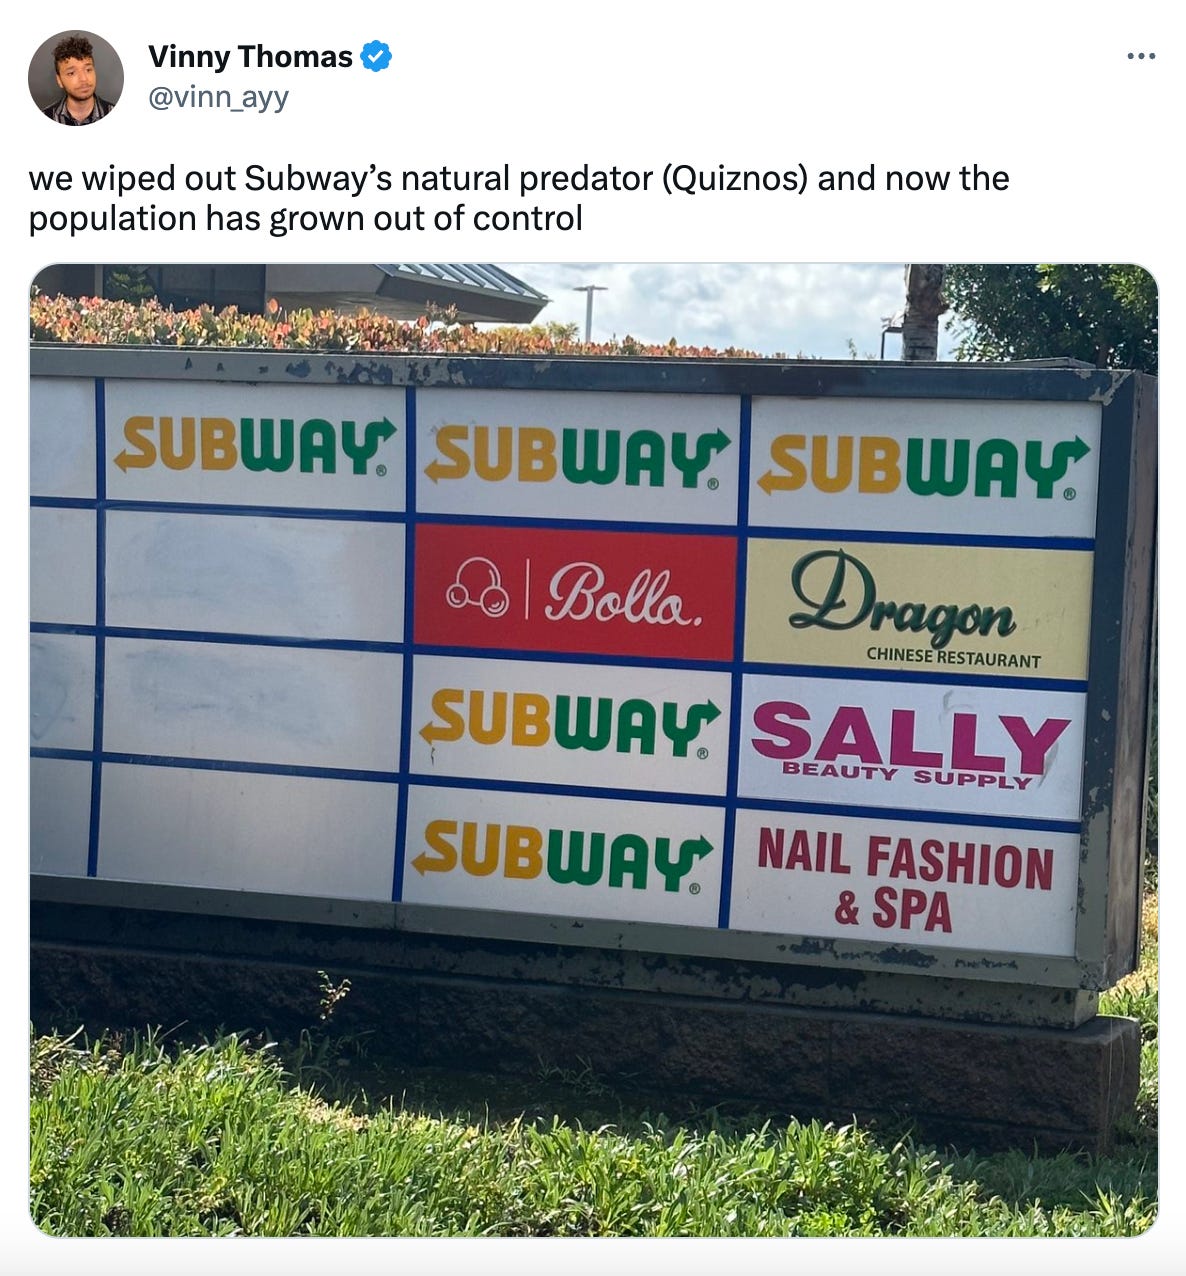 A Tweet from Vinny Thomas (@vinn_ayy) that says "we wiped out Subway's natural predator (Quizno's) and now the population has grown out of control" and features a picture of a sign in front of a strip mall with like 5 Subways on it